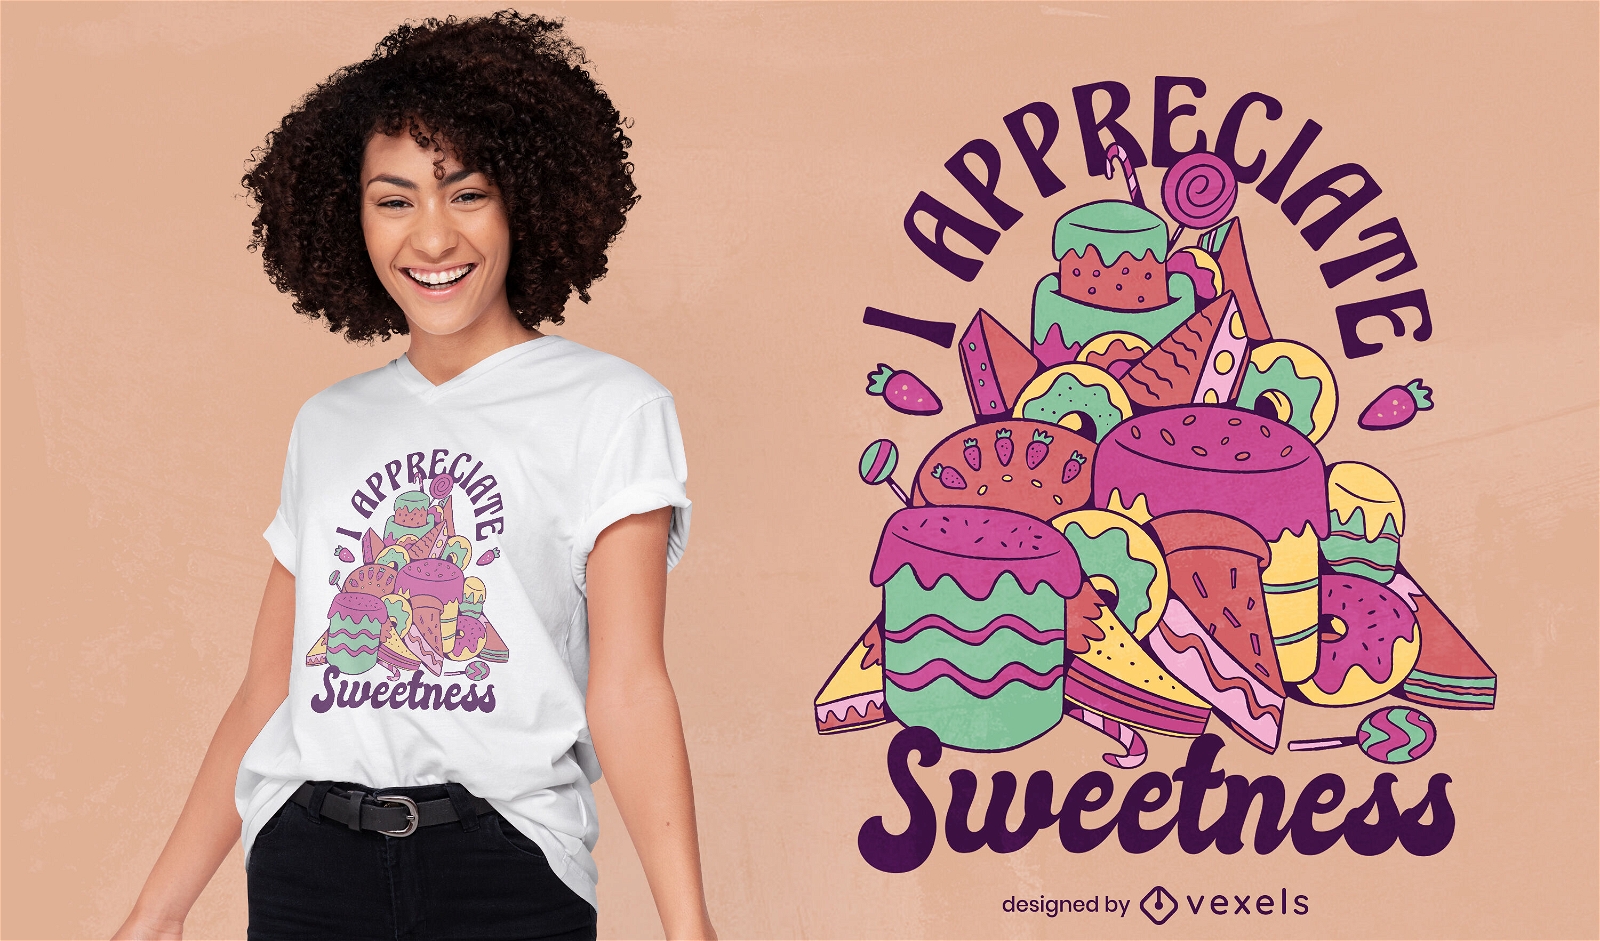 Sweet food and pastries t-shirt design